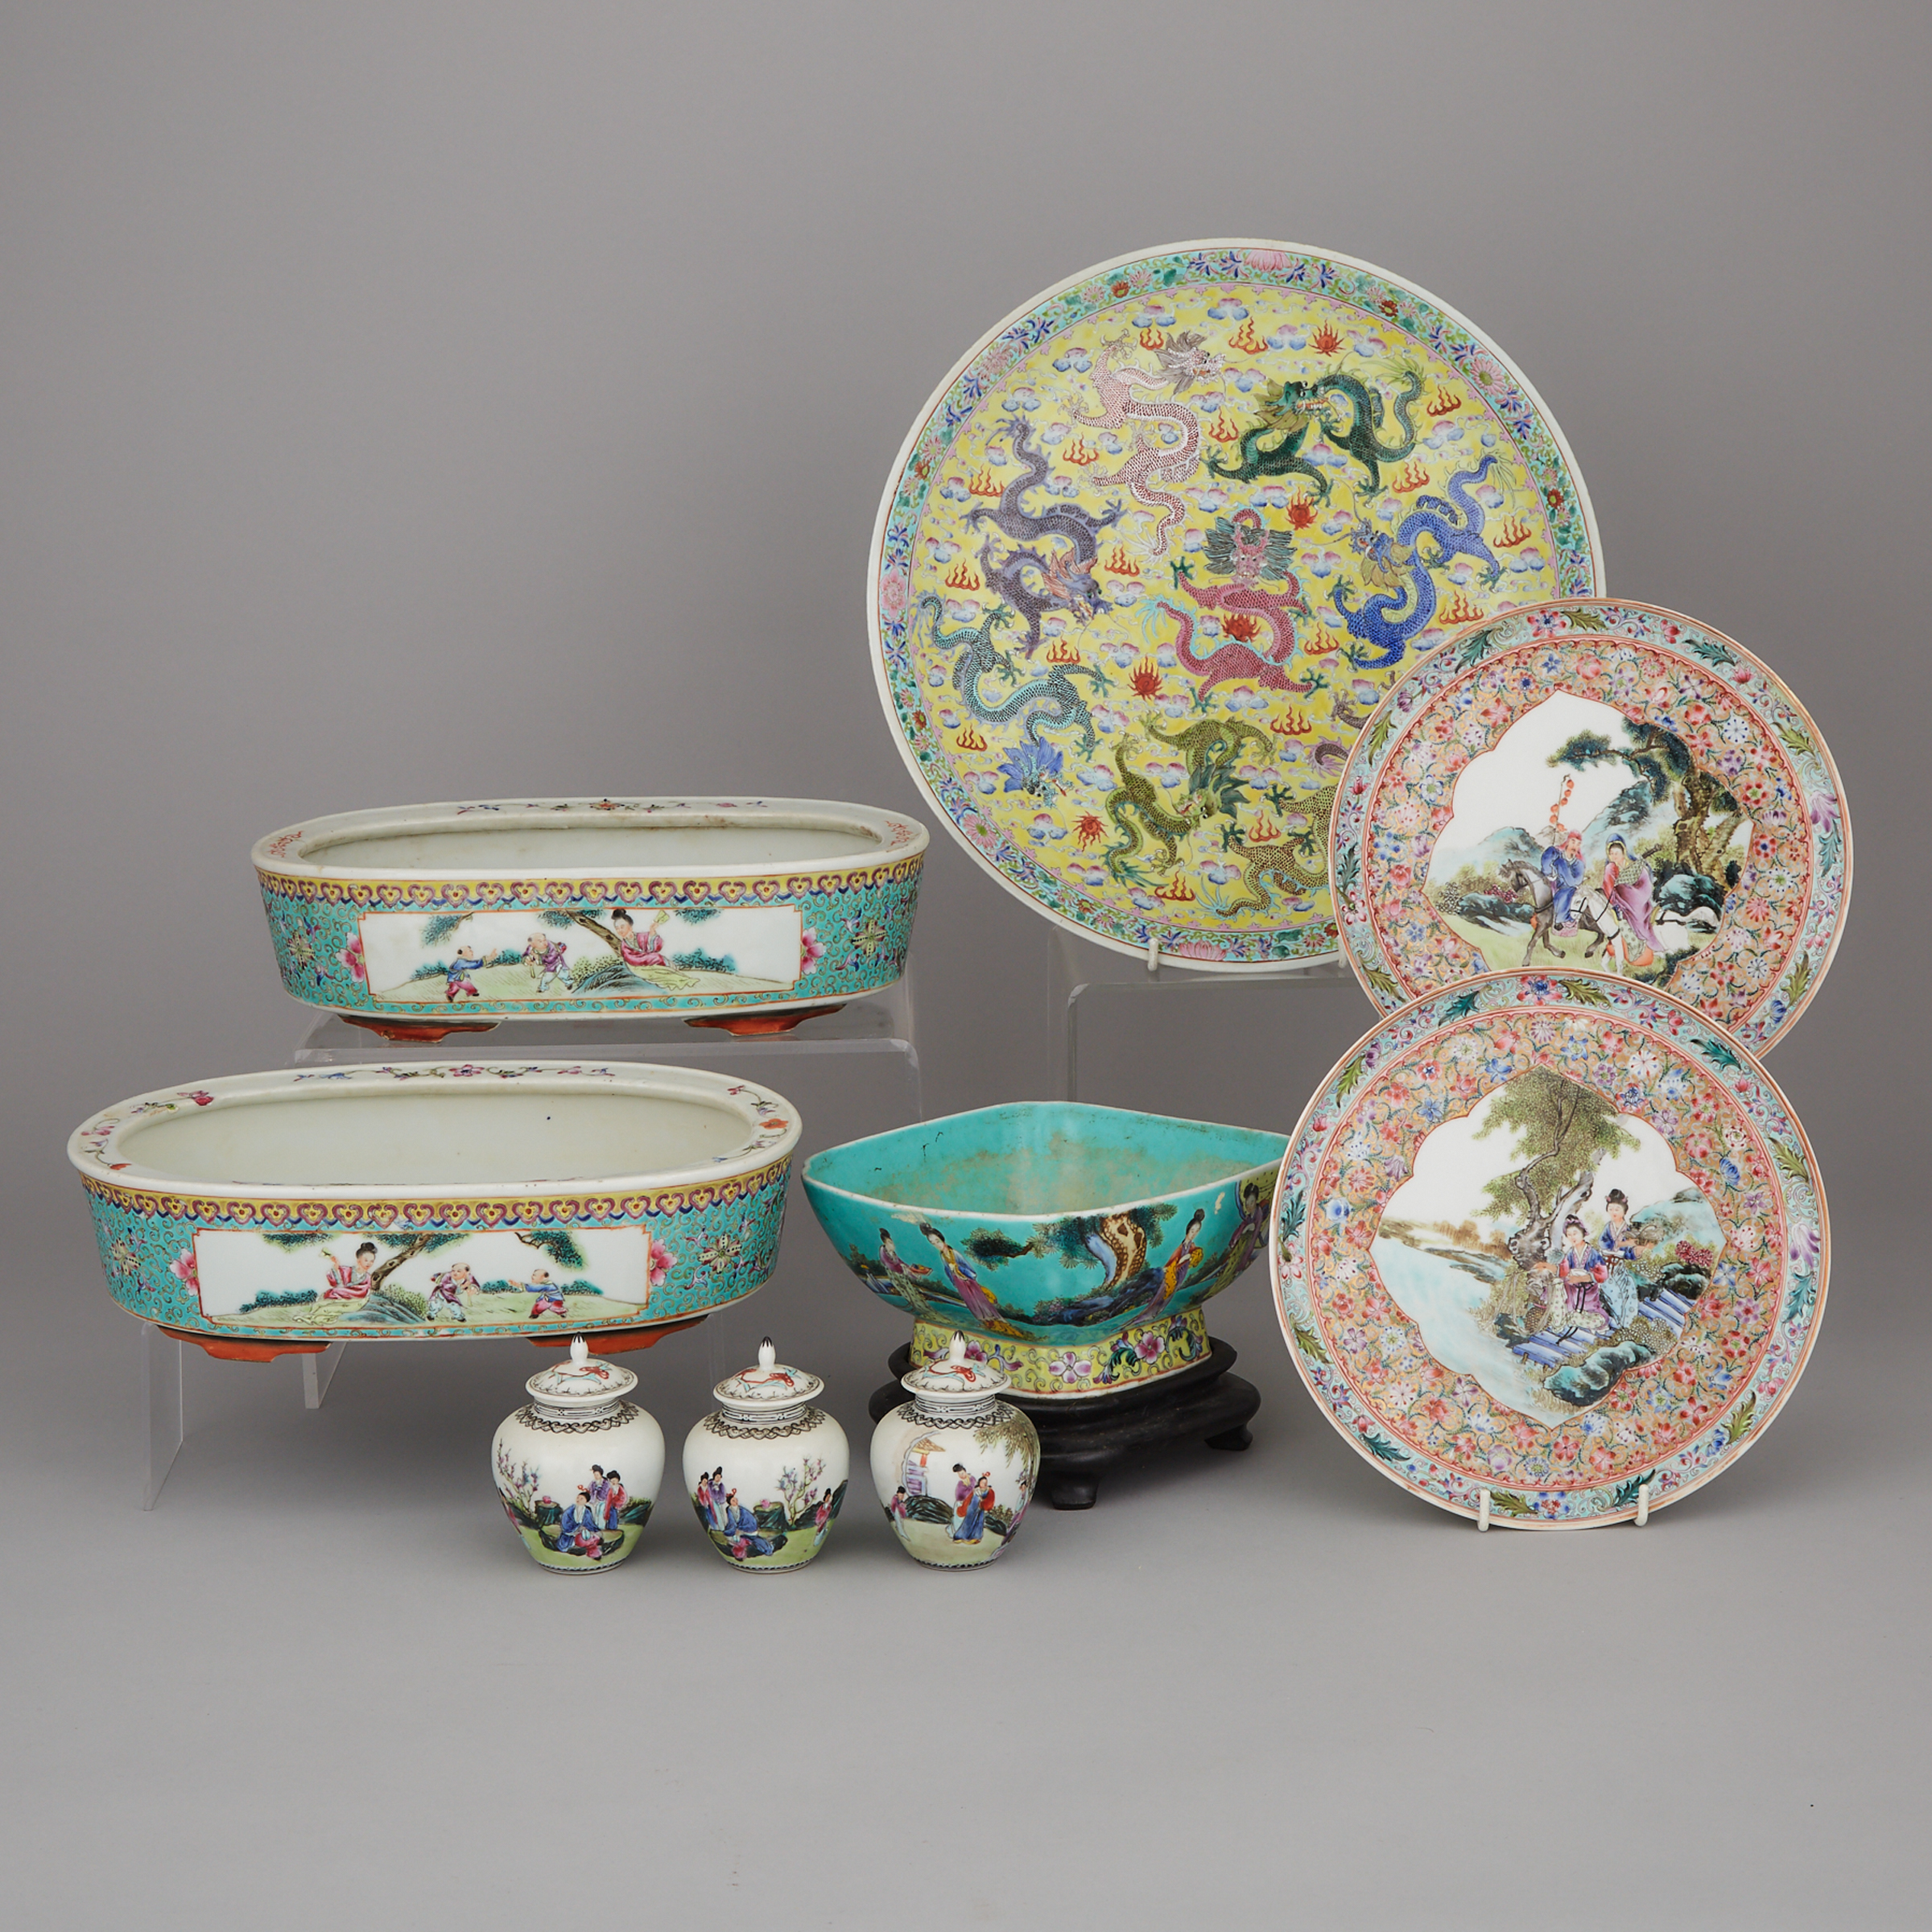 A Group of Nine Famille Rose Wares, 20th Century